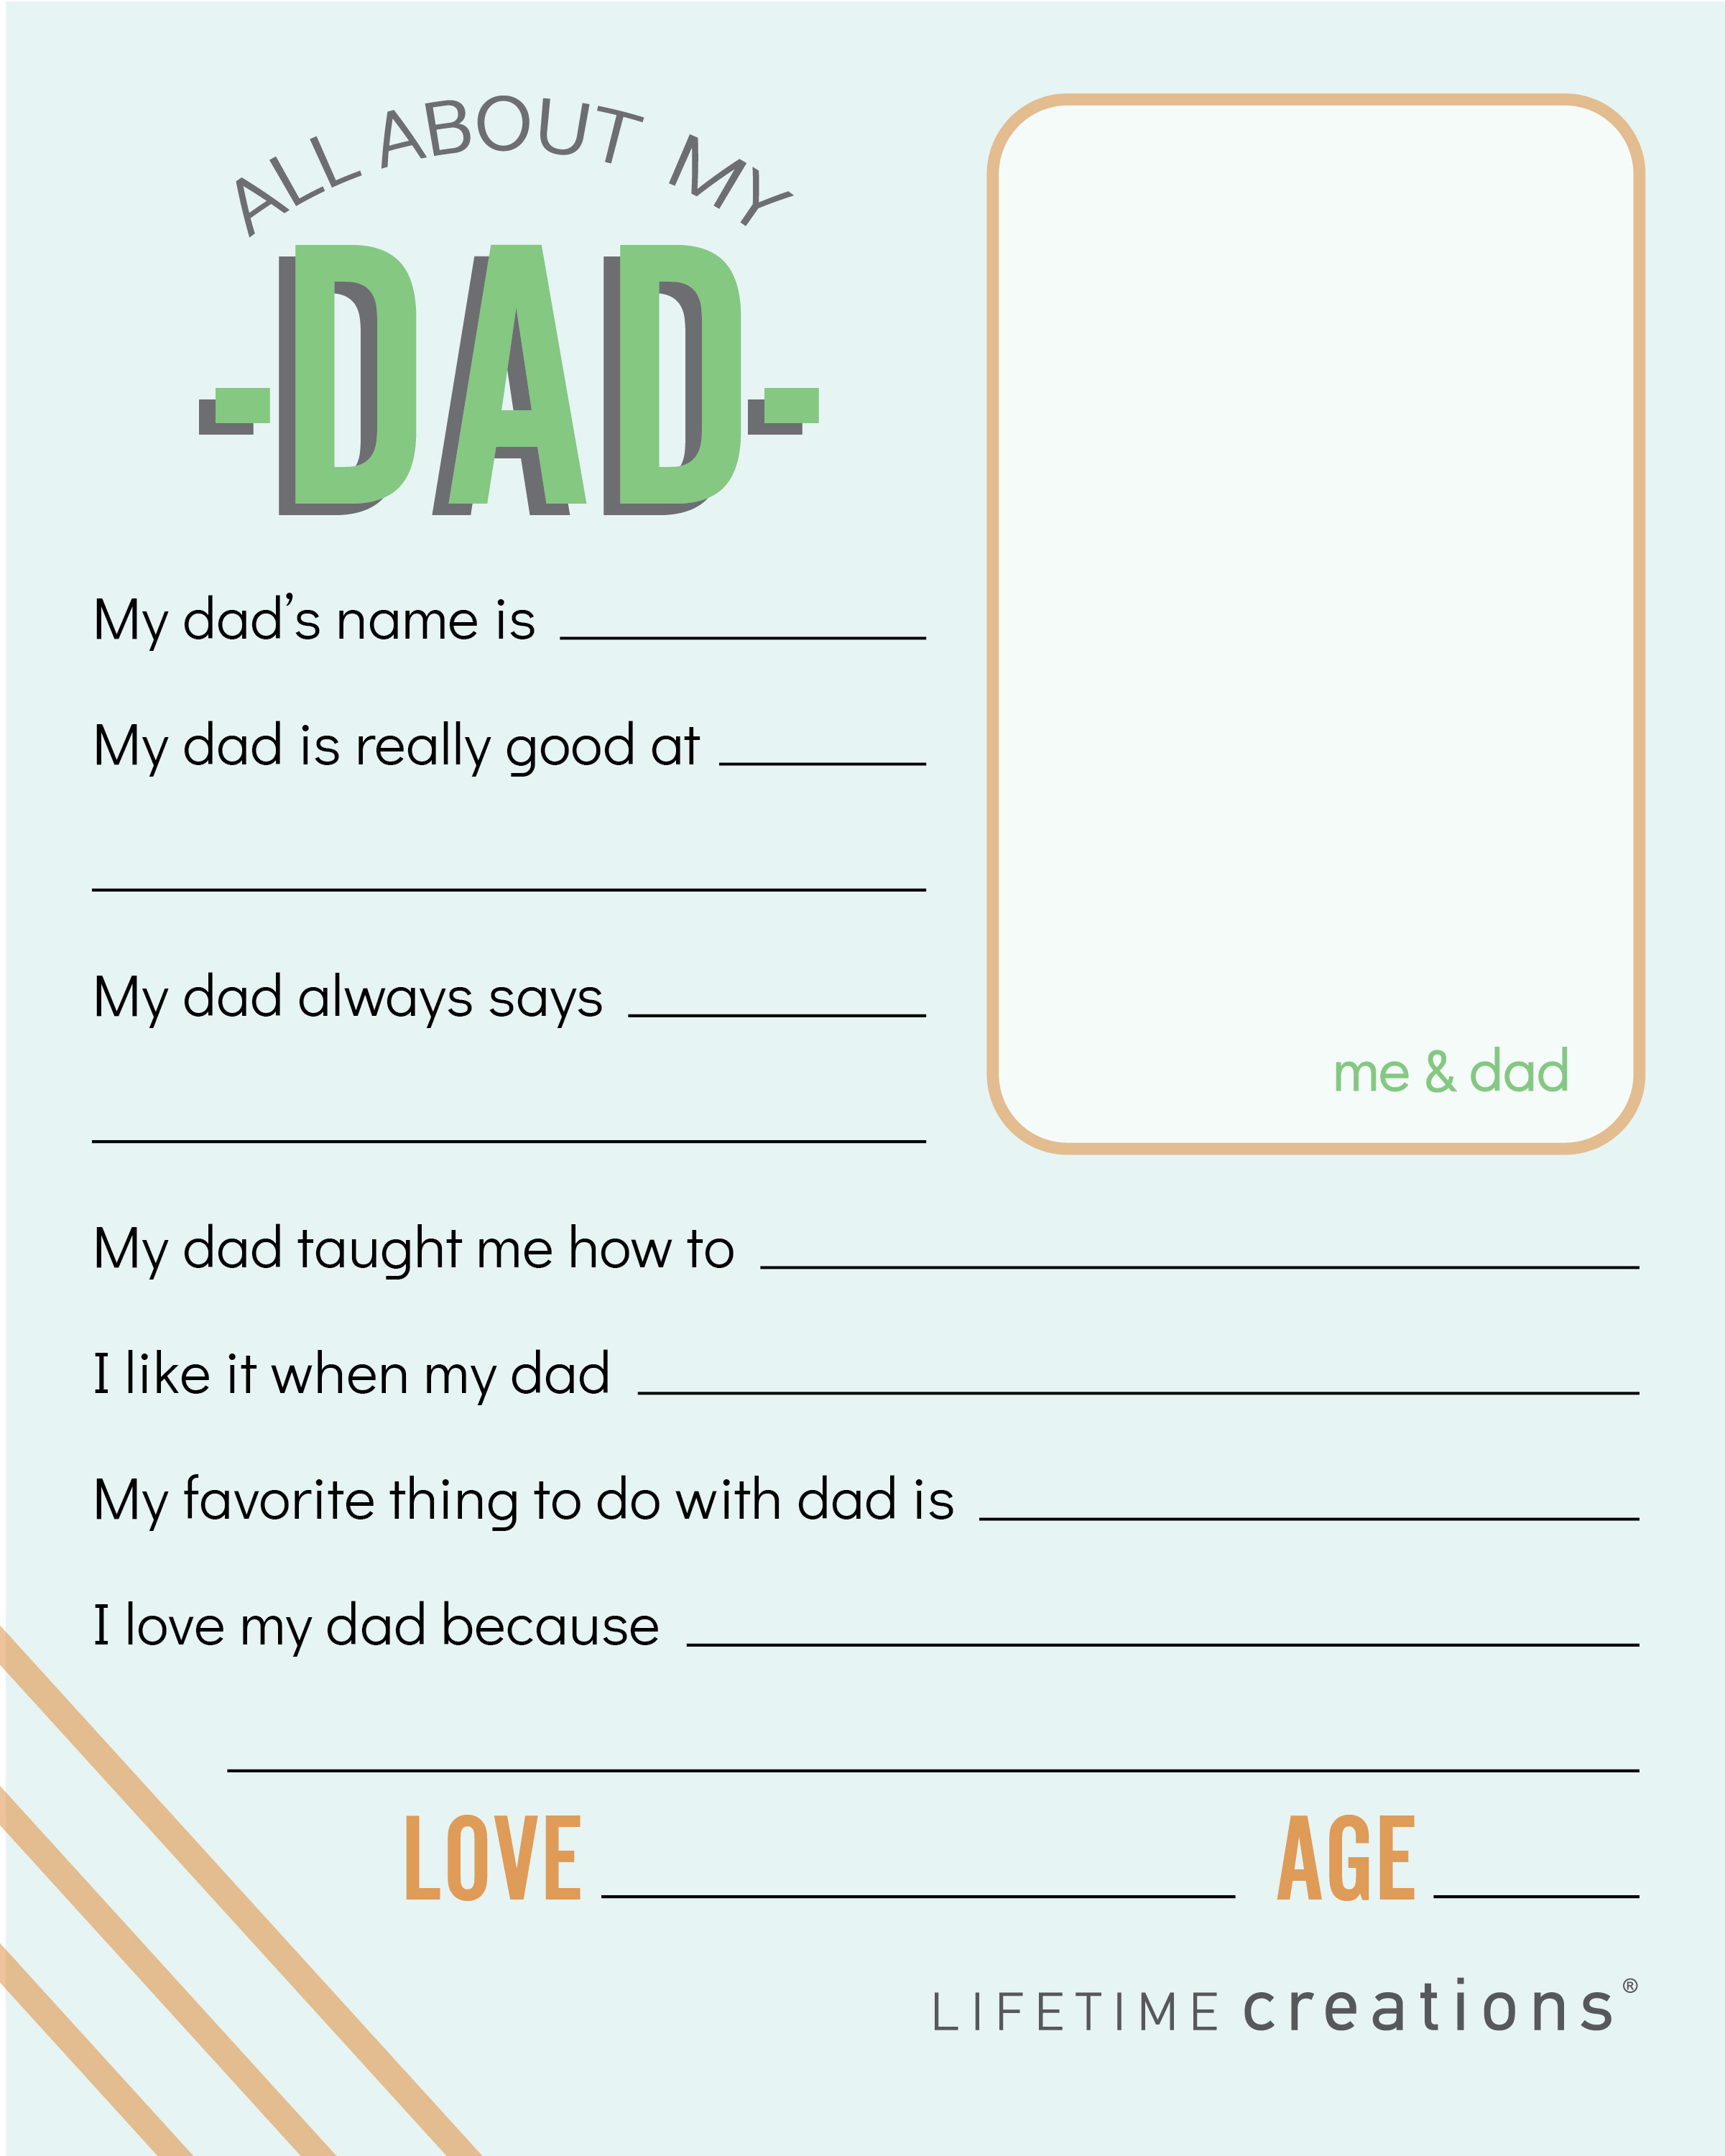 Fathers Day Printable  Fathers day questionnaire, Father's day